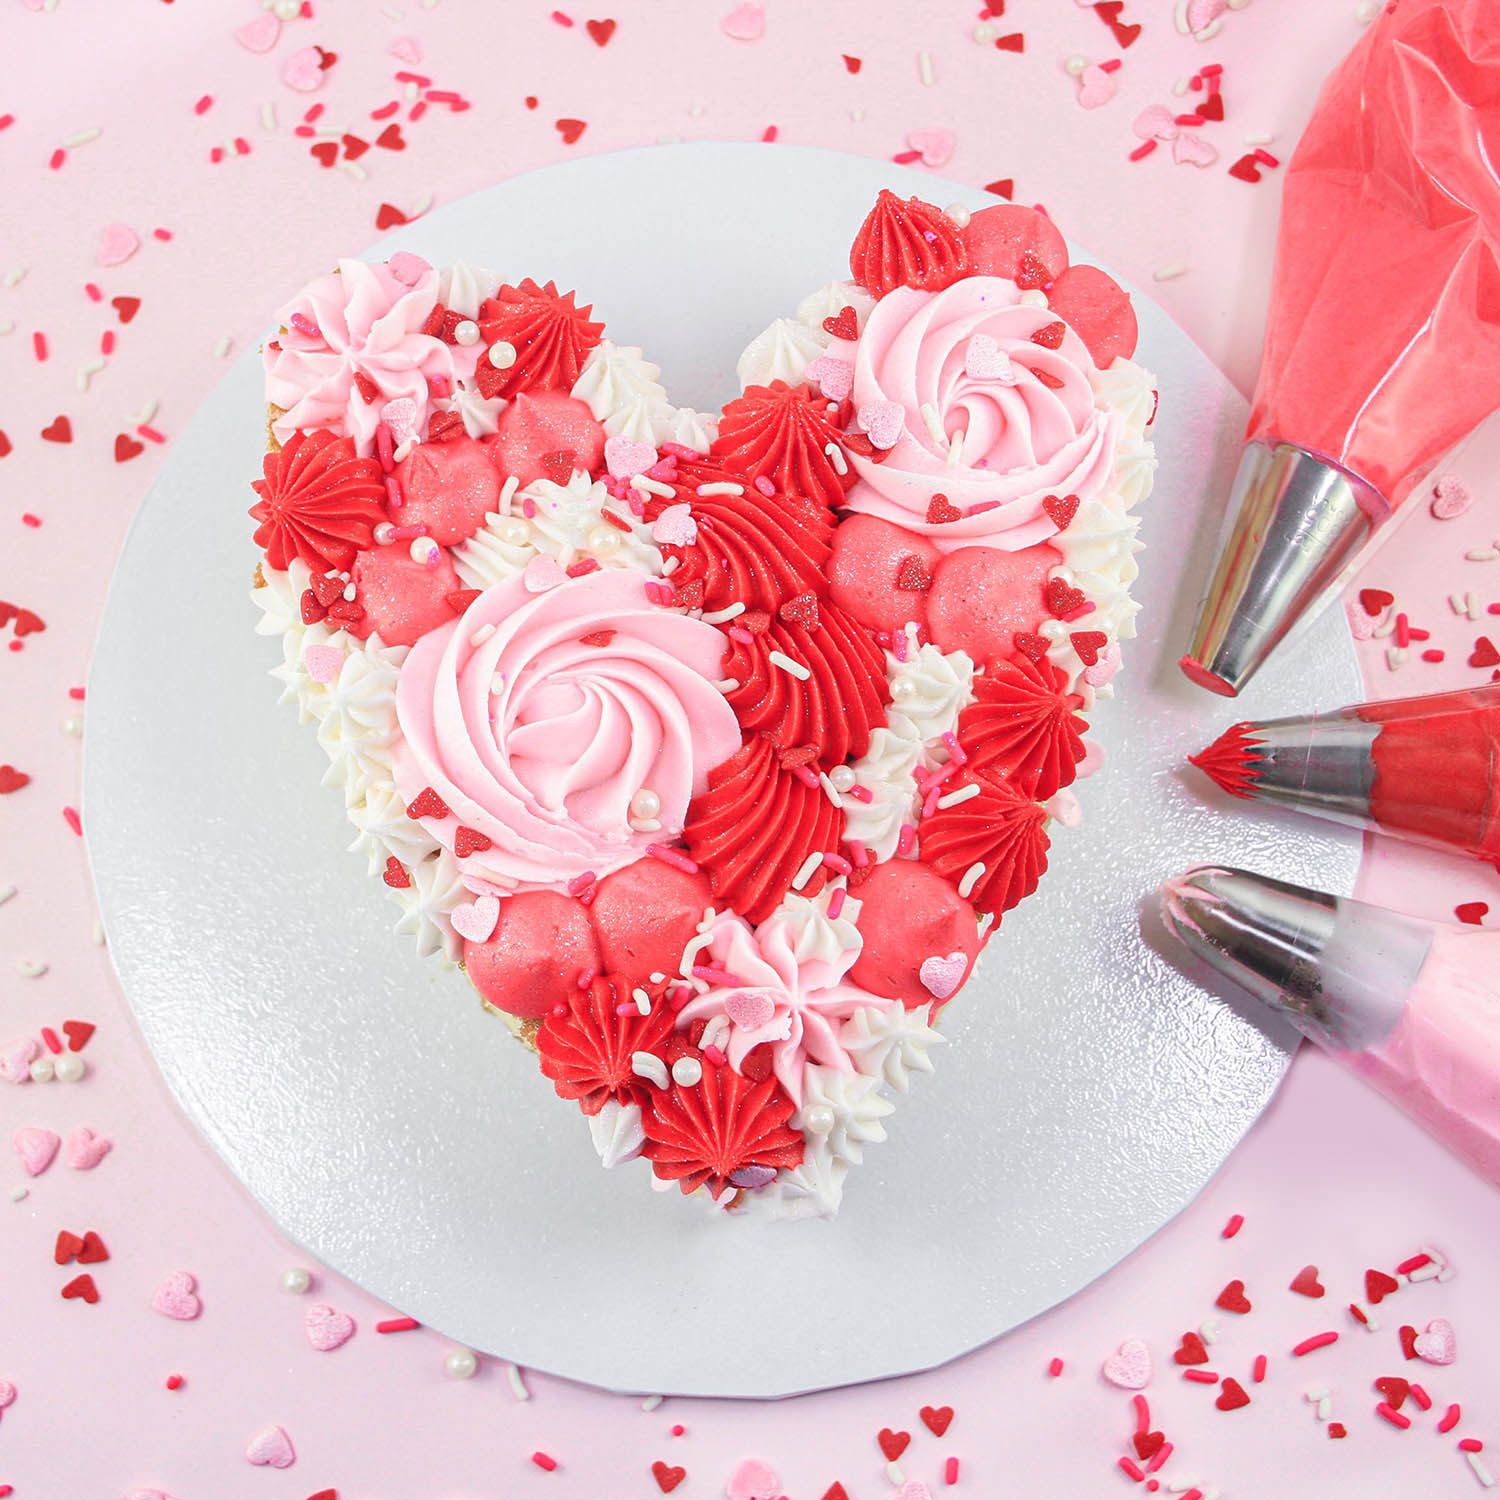 Heart shaped cake piped with red, pink, white buttercream